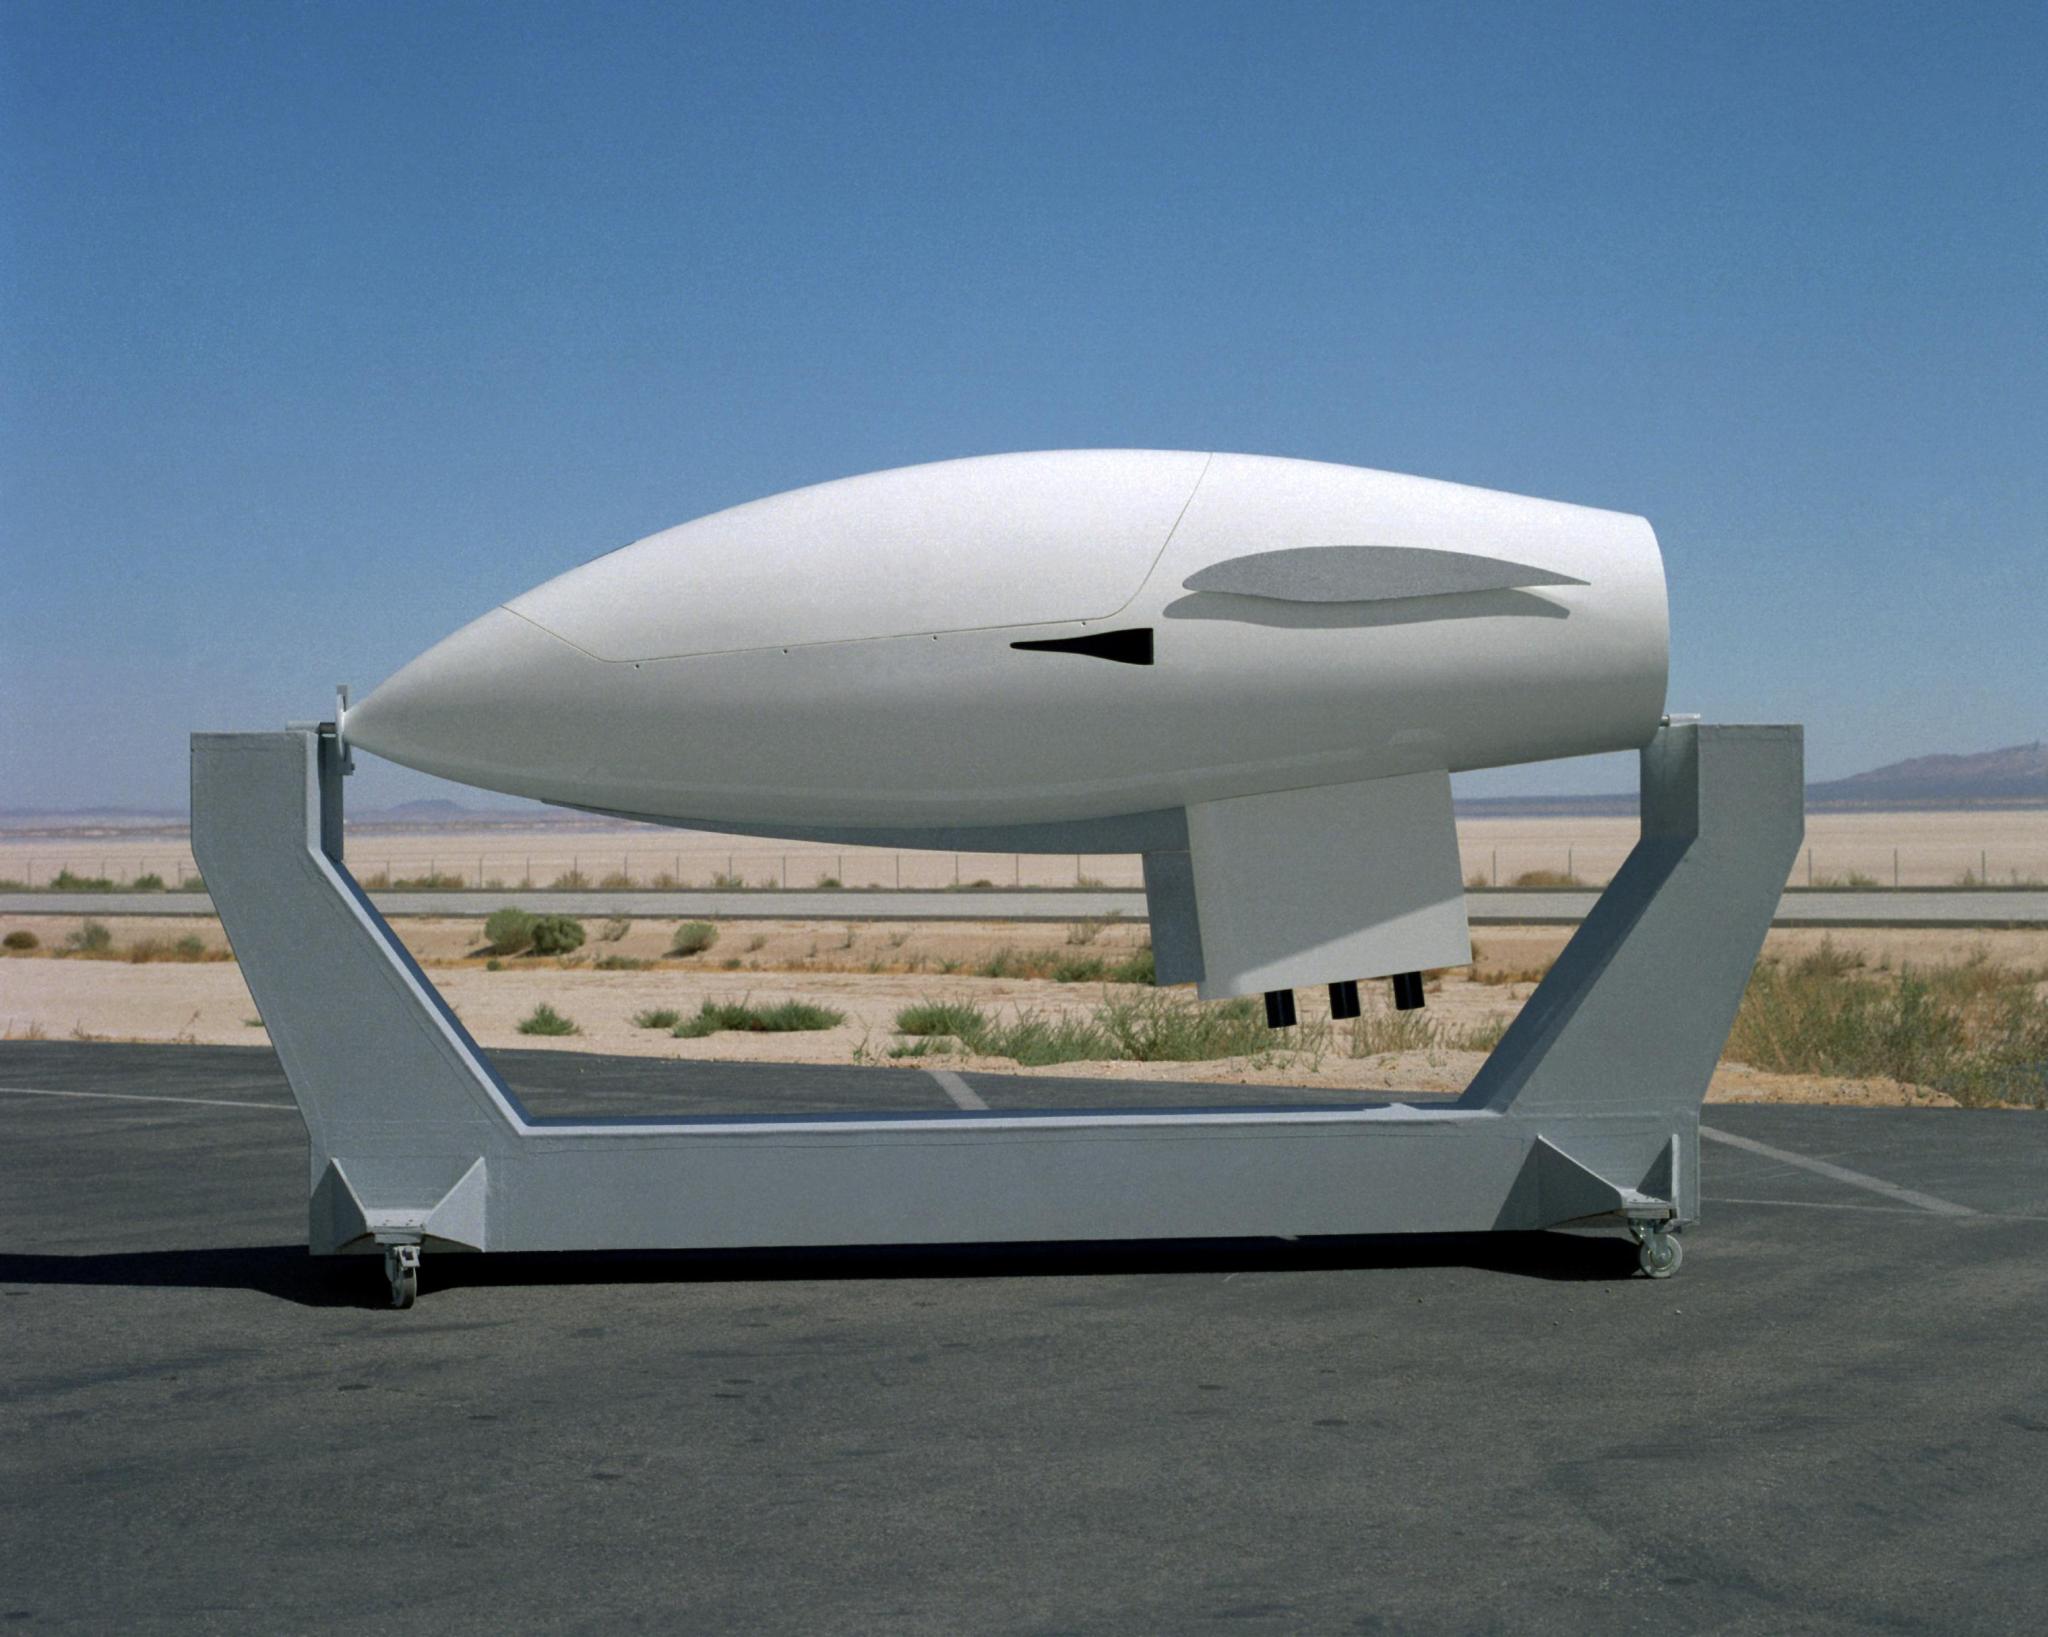 A mock-up of the Apex sailplane.